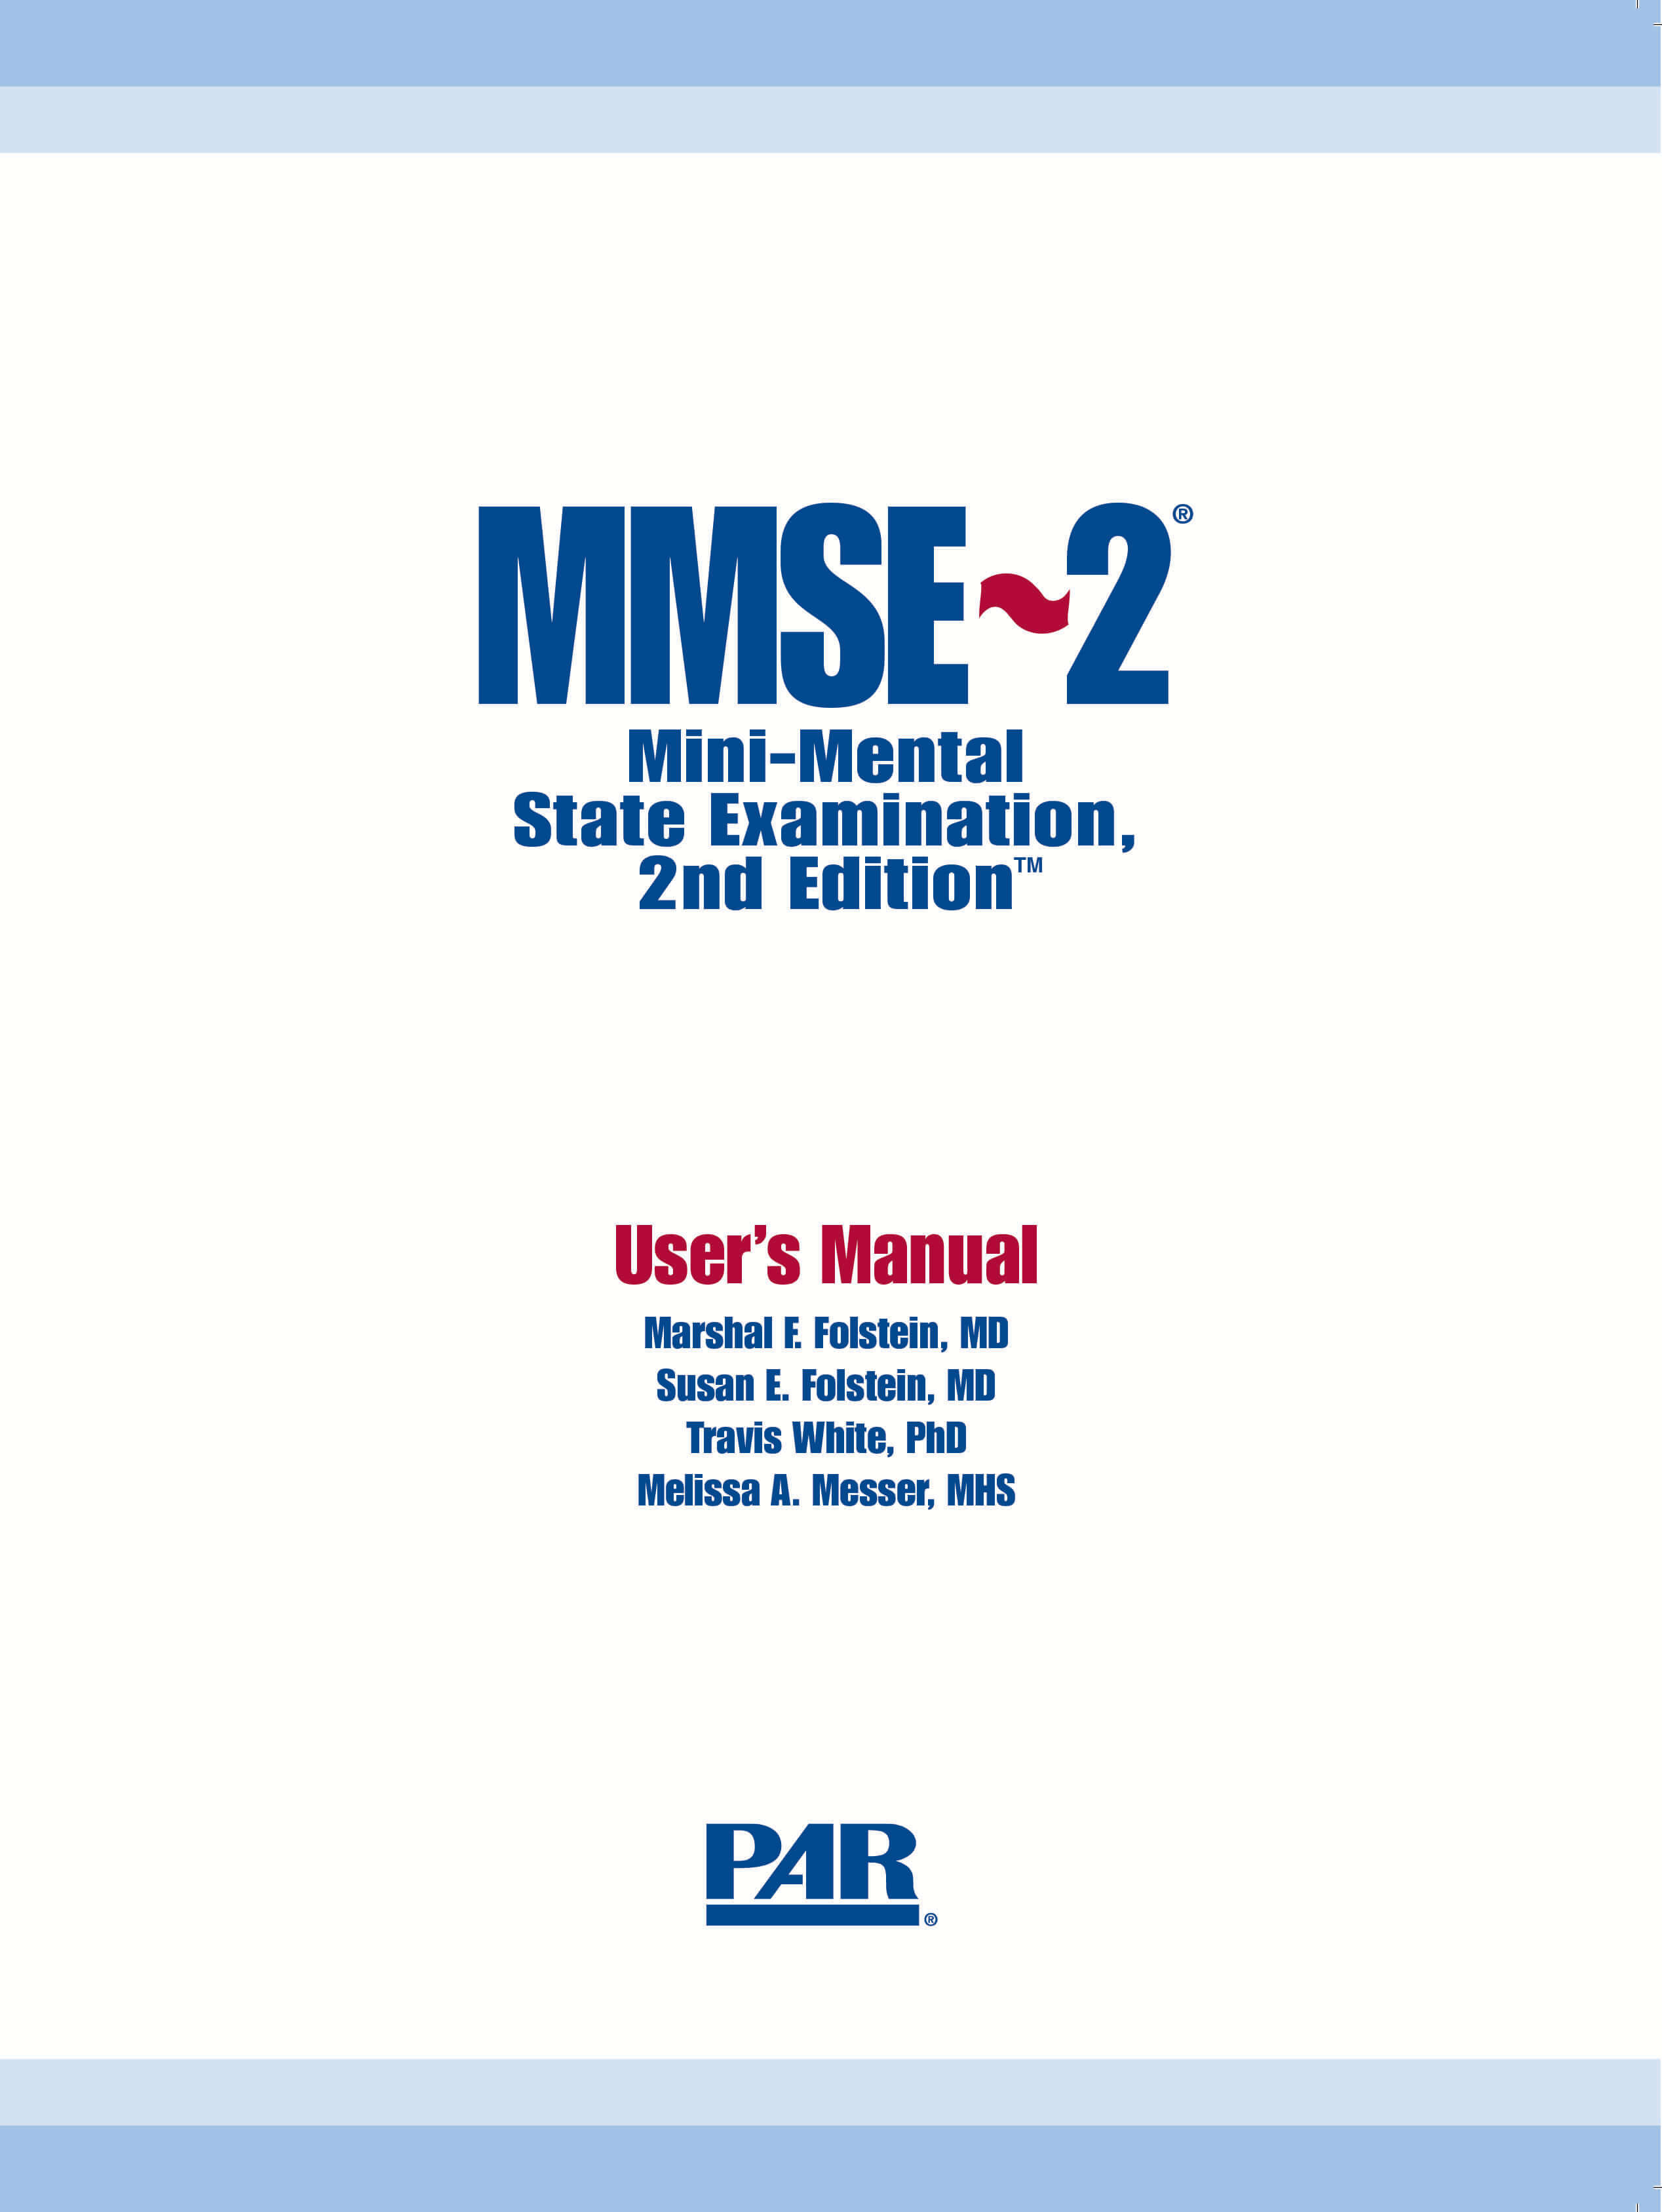 Mini-Mental State Examination, 2nd Edition™ - 